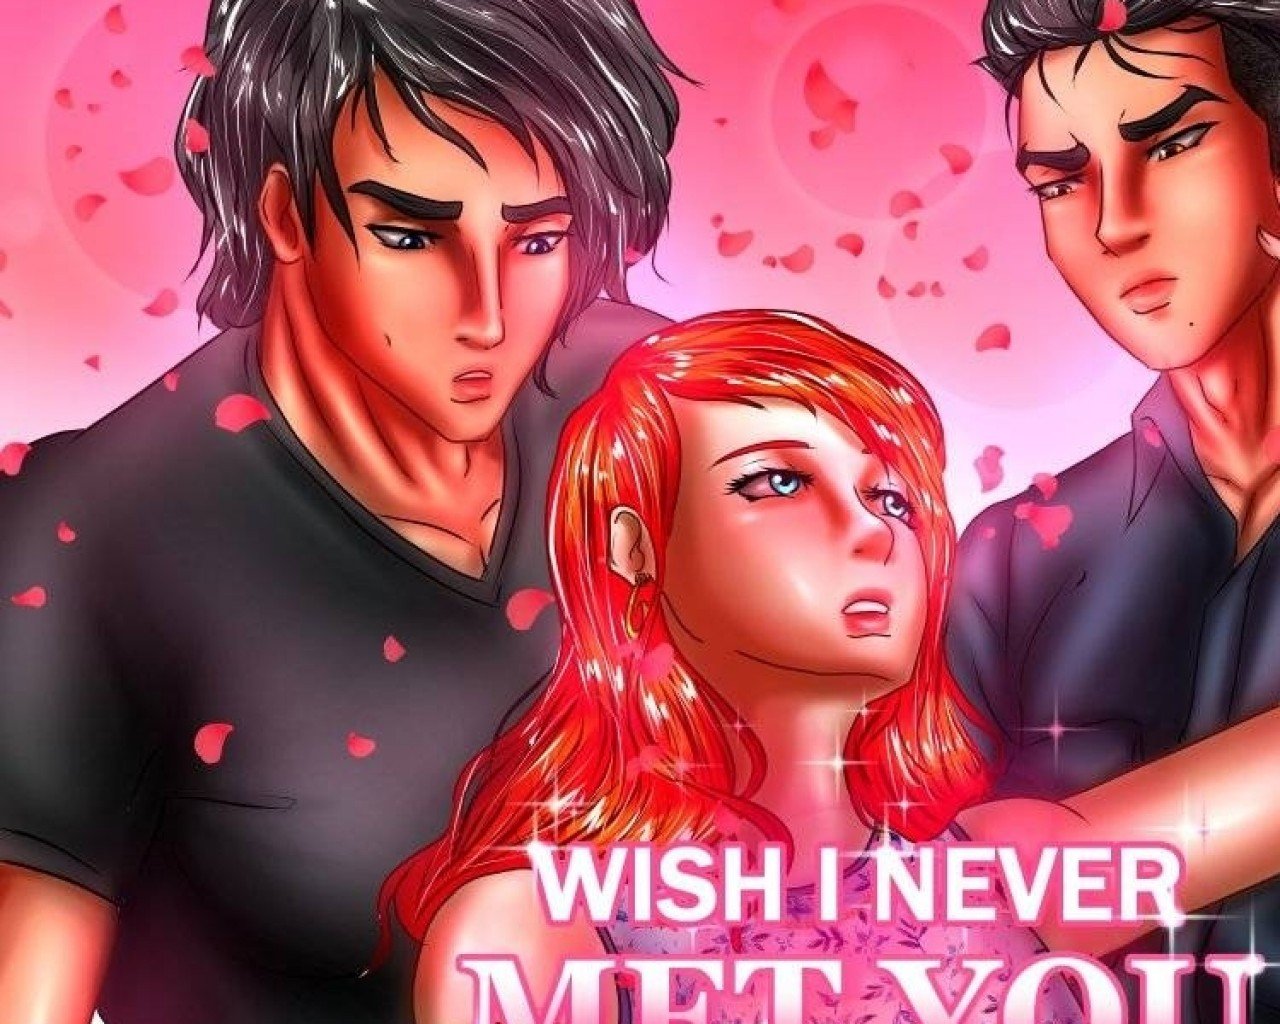 Poster Image for Wish I never met you